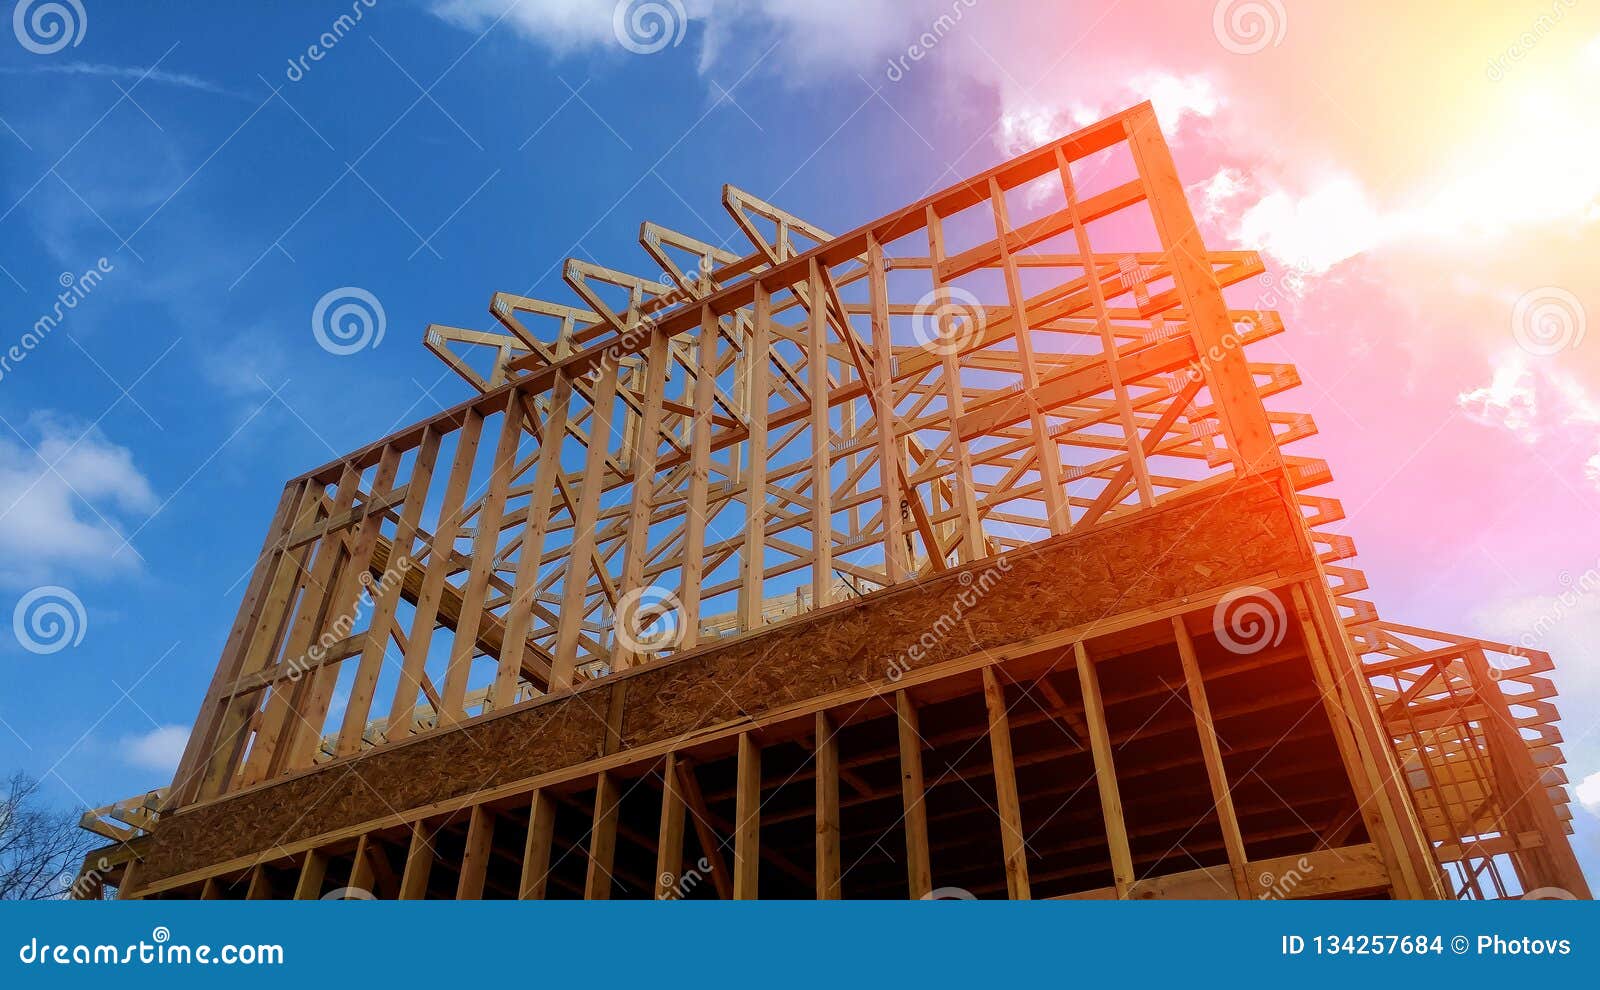 timber frame house, new build roof with wooden home construction framing